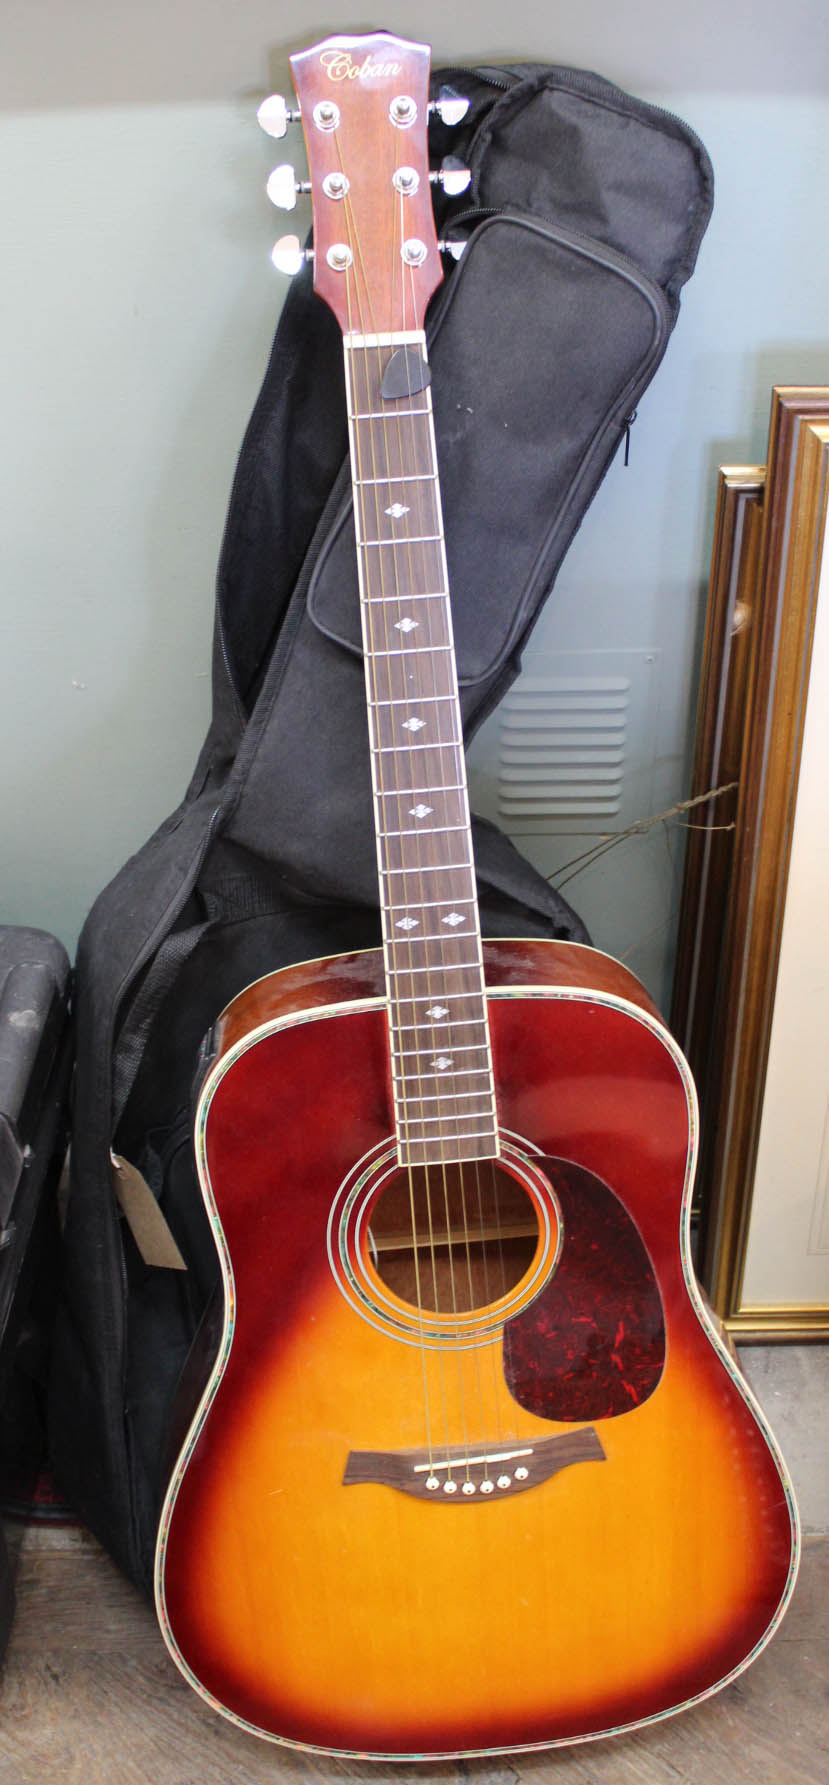 An acoustic guitar in case